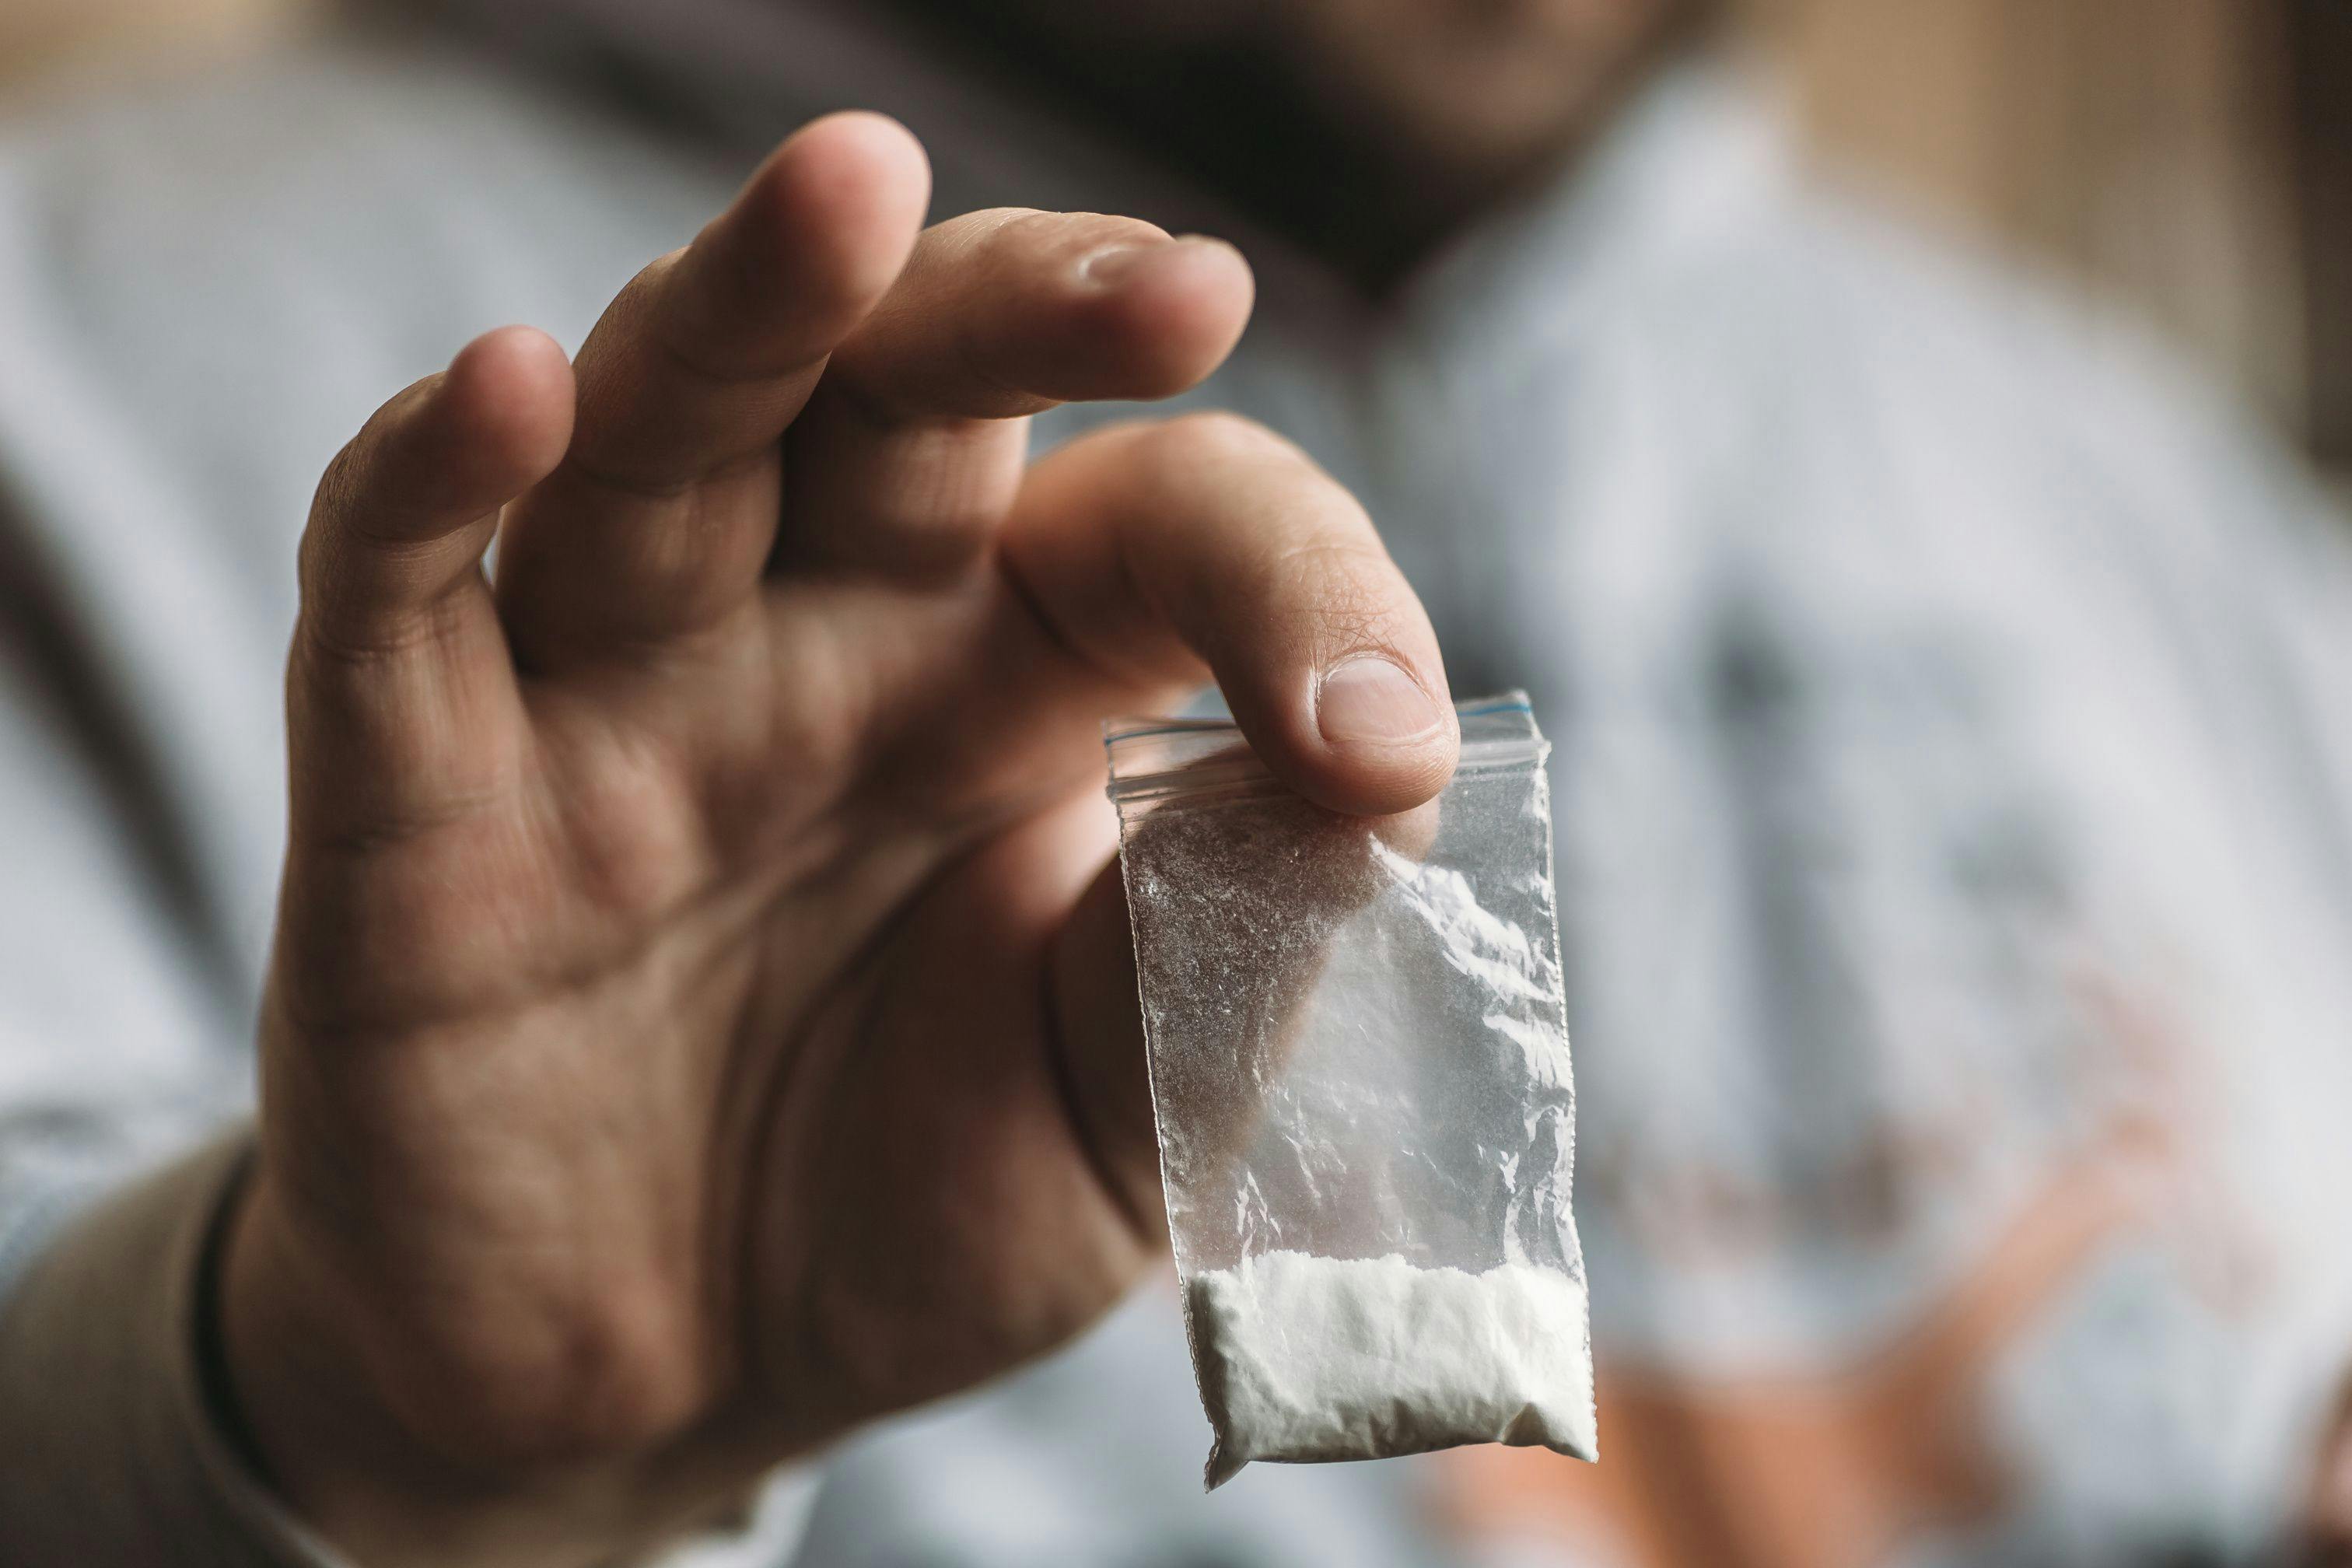 Man hand holding cocaine or other drugs, drug abuse | Image Credit: © DedMityay - stock.adobe.com